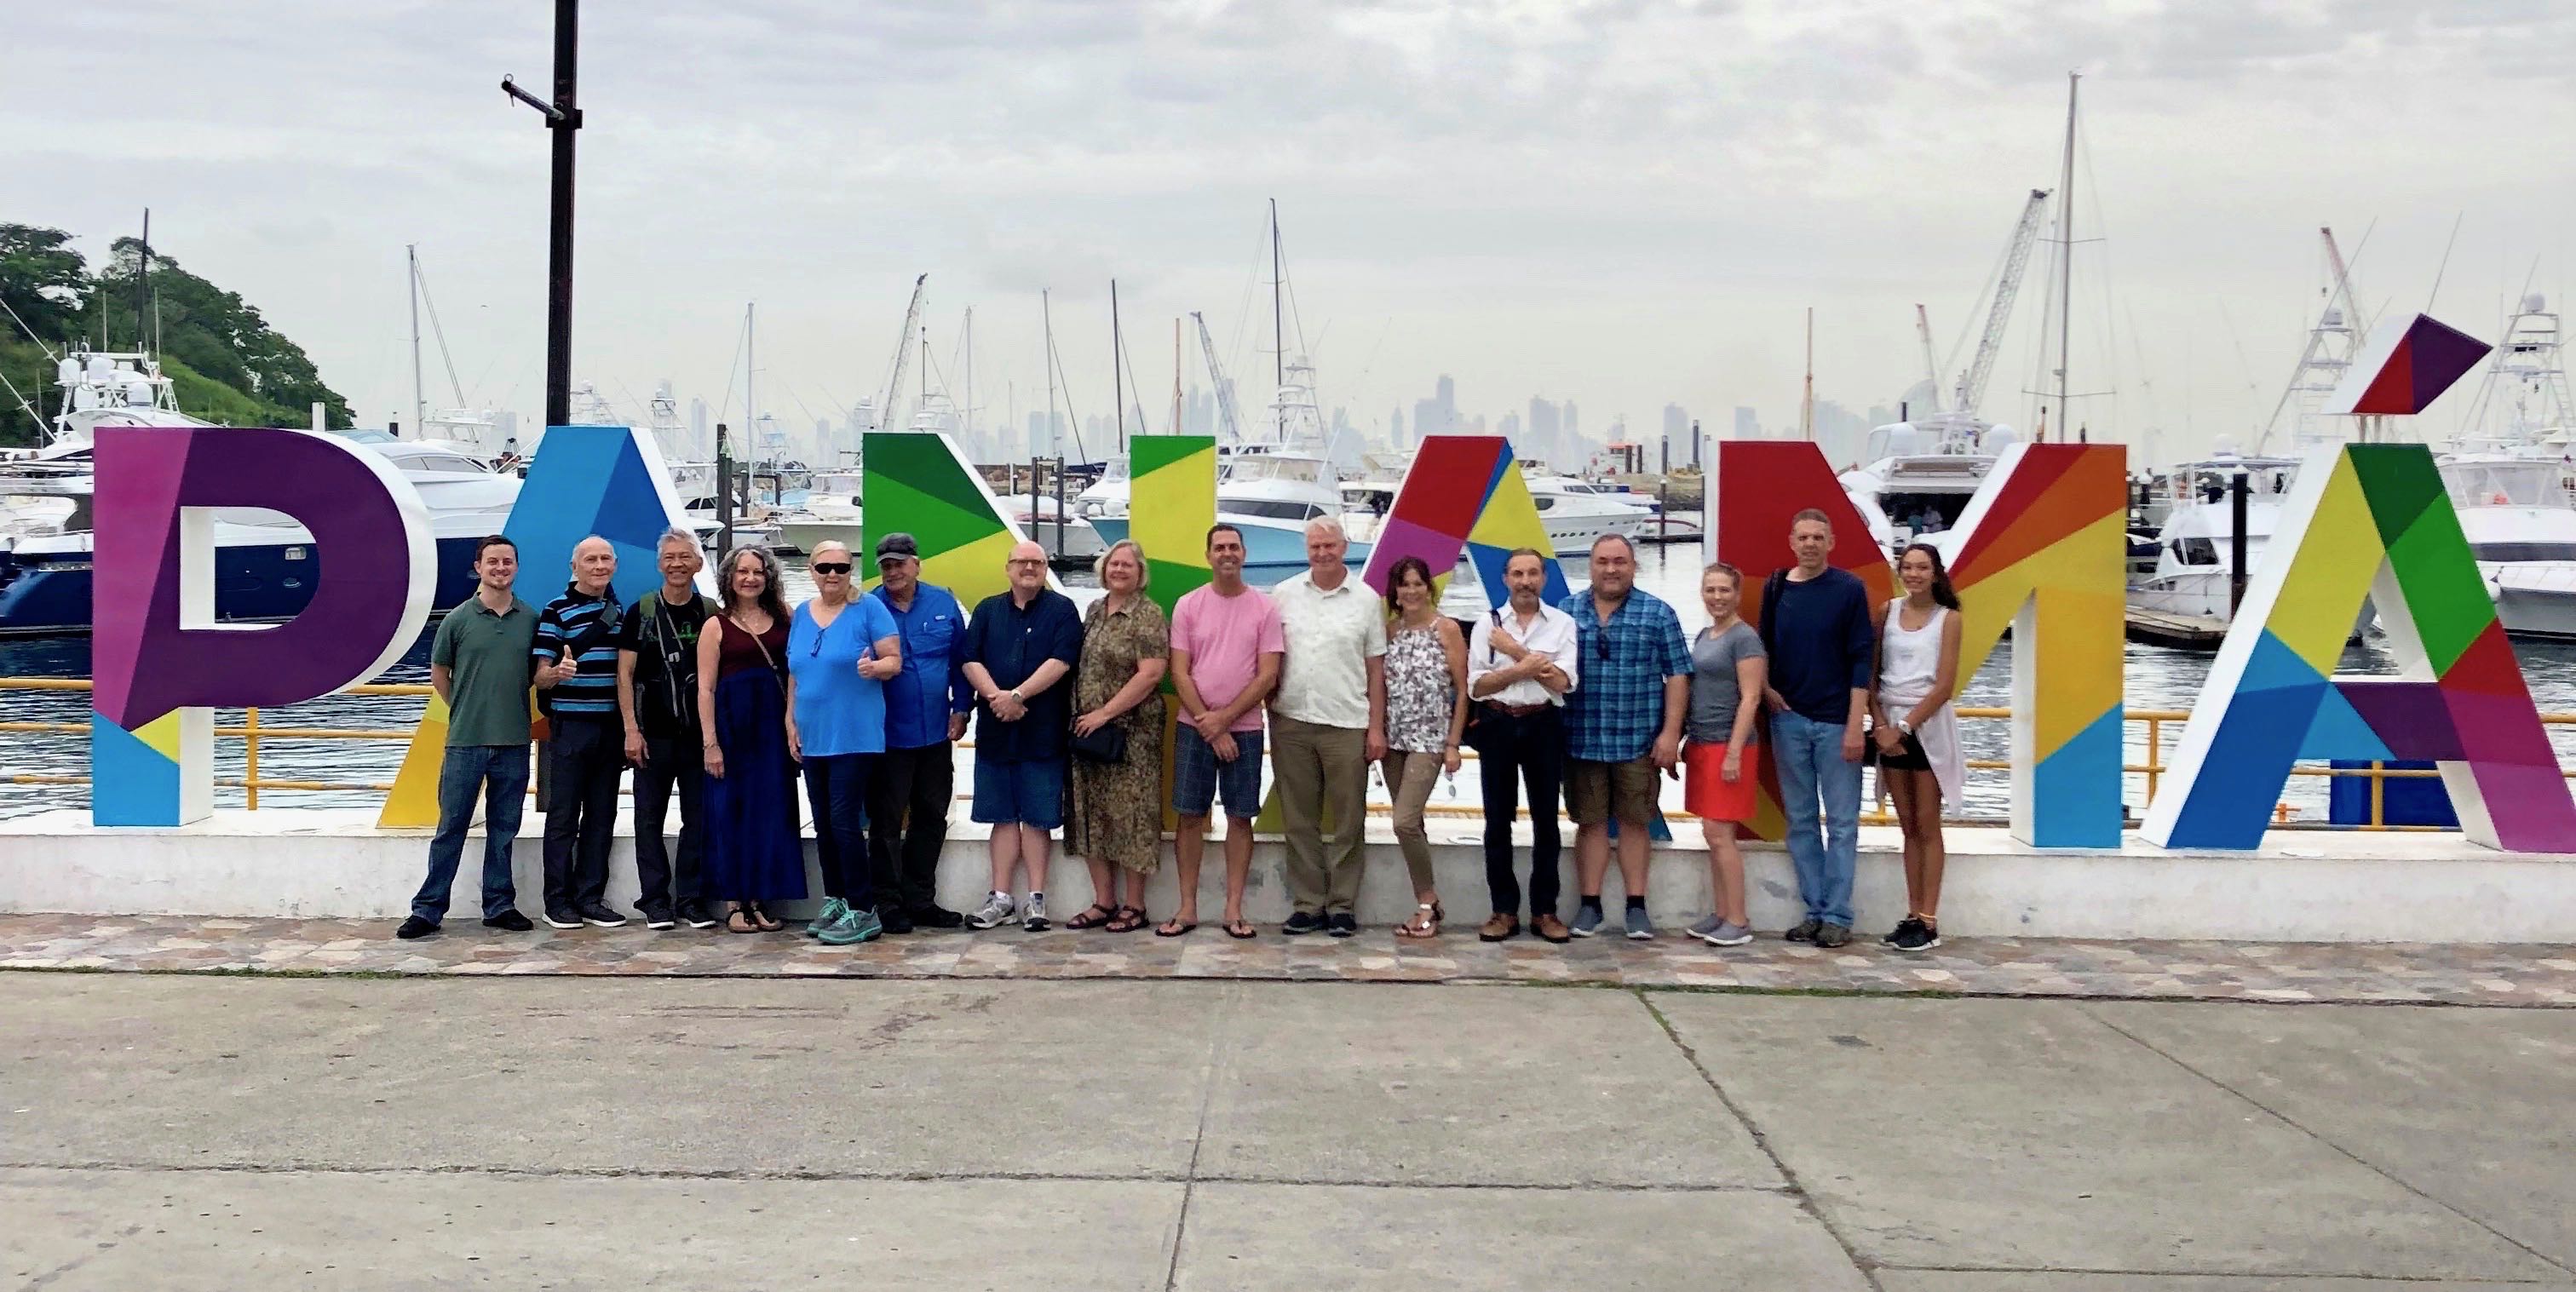 Evie Brooks hosts 3-day VIP Education Tours that cover "All Things Panama", including becoming an ex-pat, starting a second business, investing in real estate and agriculture and more.